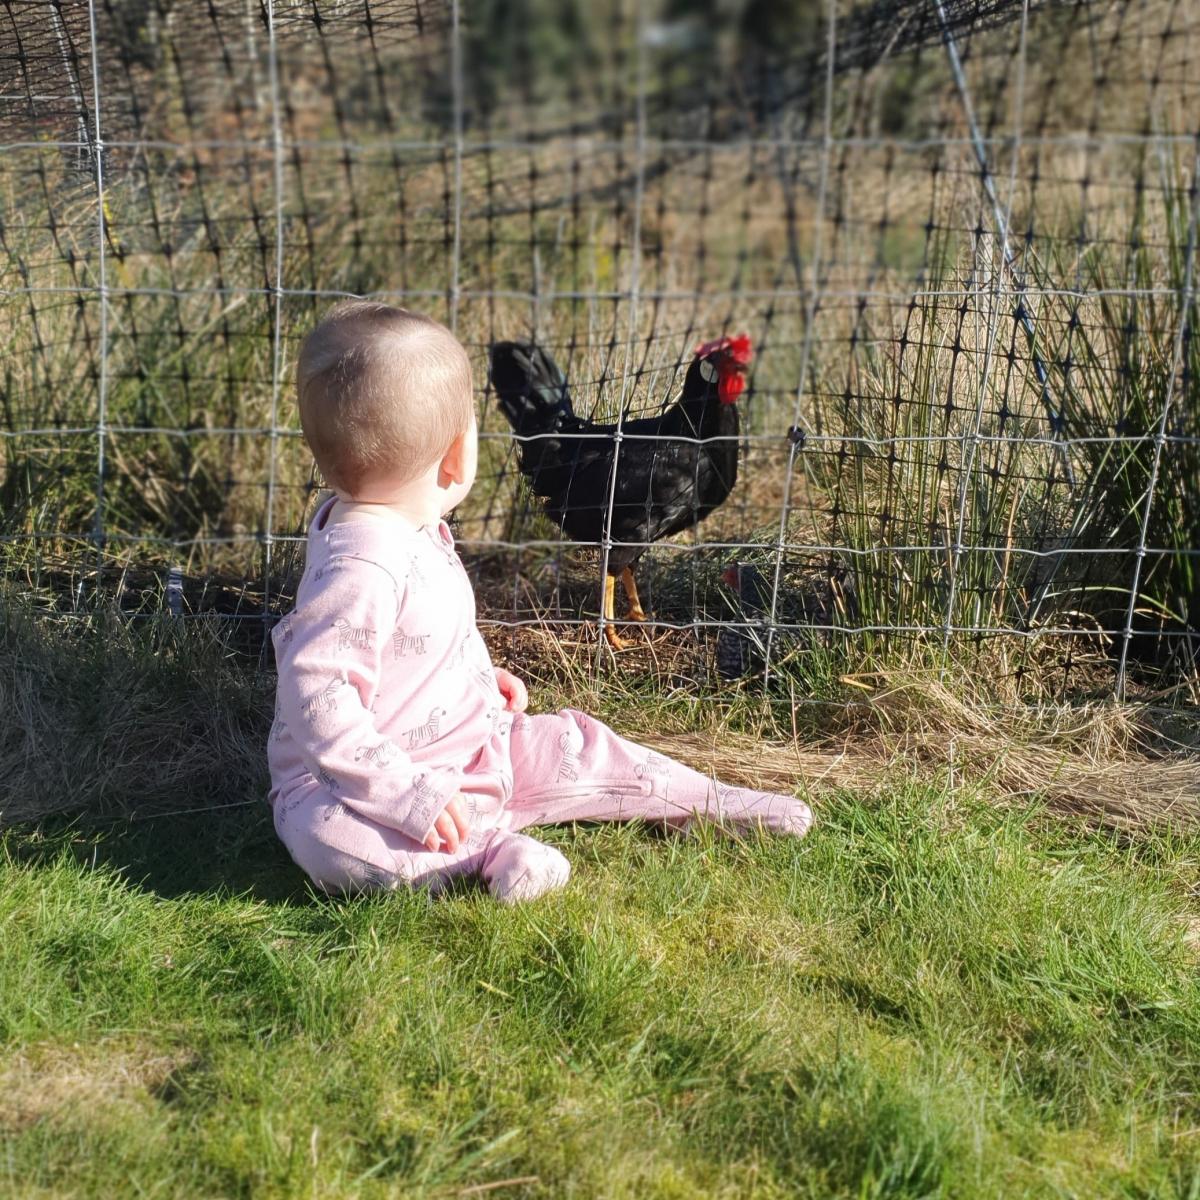 Carrie-Anne Maclean - Lennon Maclean. It's never too early for morning chats with the chicken